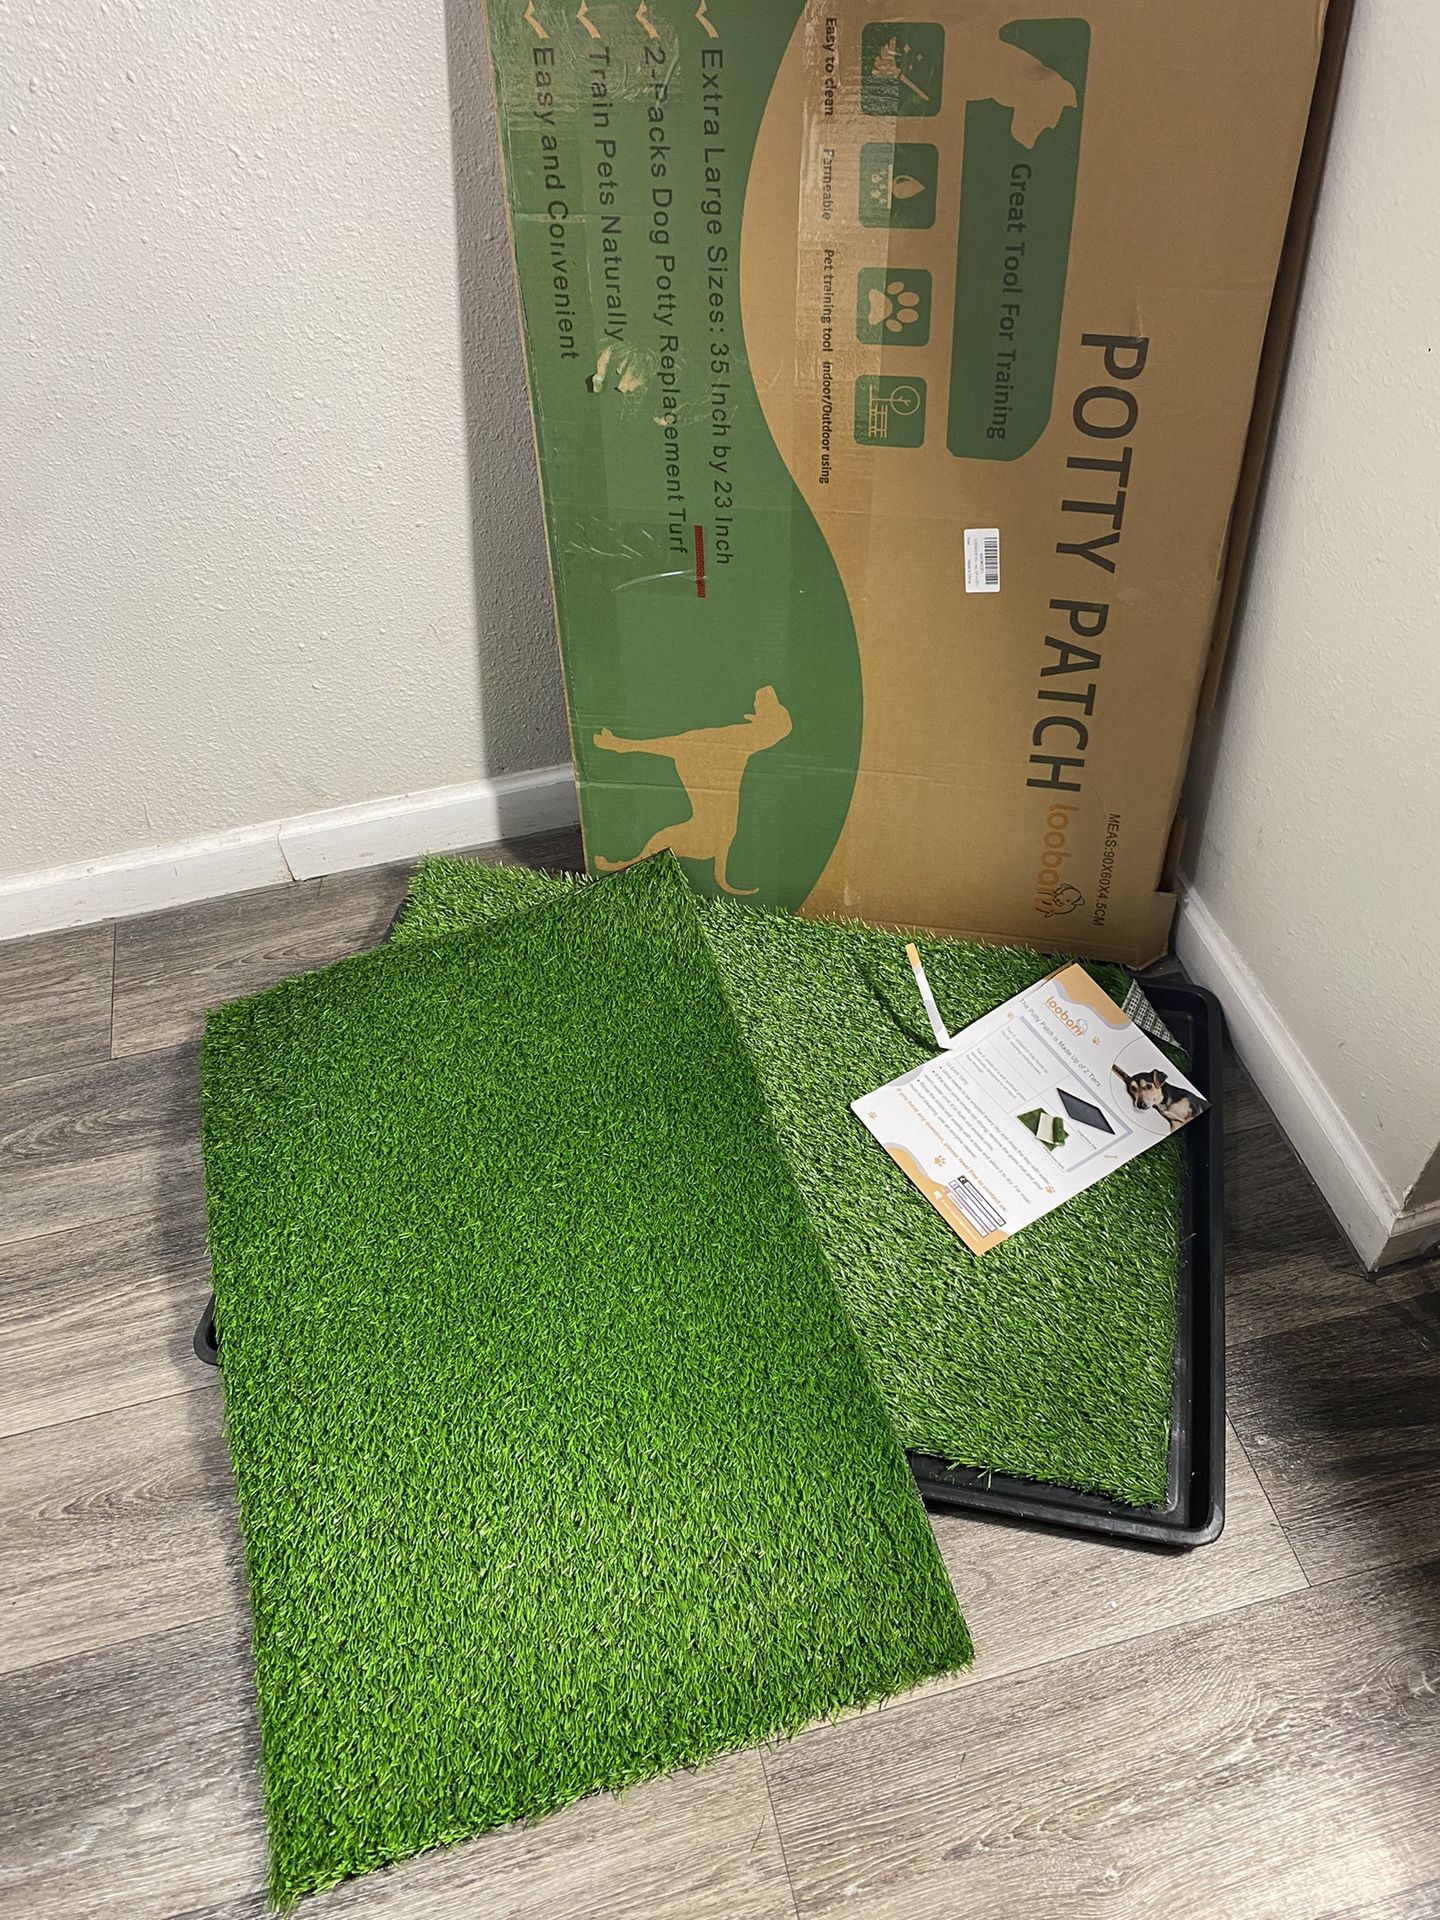 LOOBANI 35in x 23in Extra Large Grass Porch Potty Tray, 2-Pack Replacement Artificial Grass Puppy